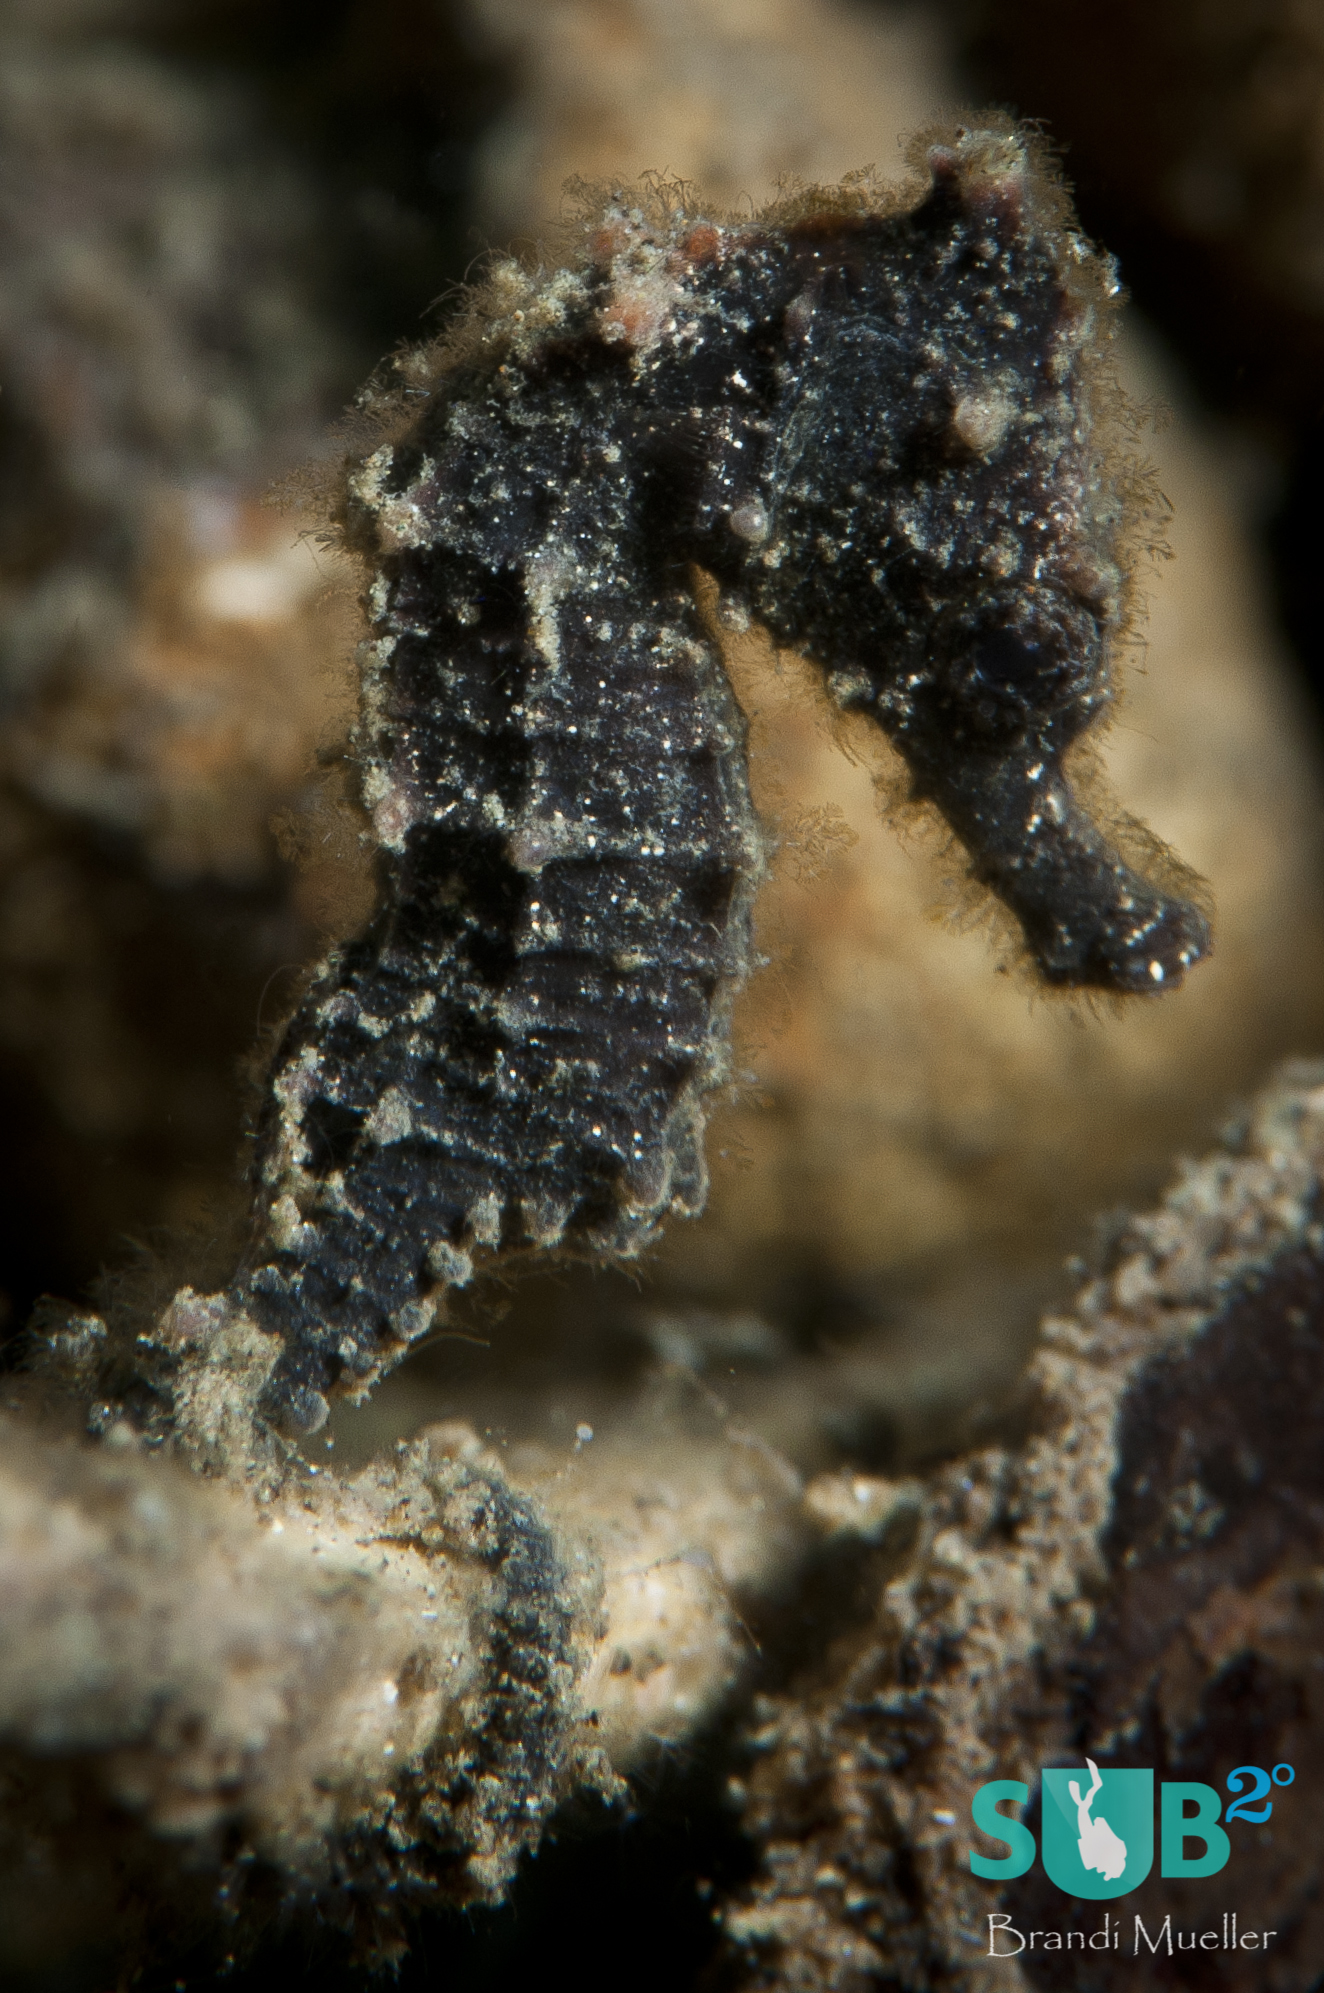 This tiny seahorse's coloration allows it to blend in perfectly with its home's surrounding dark debris.